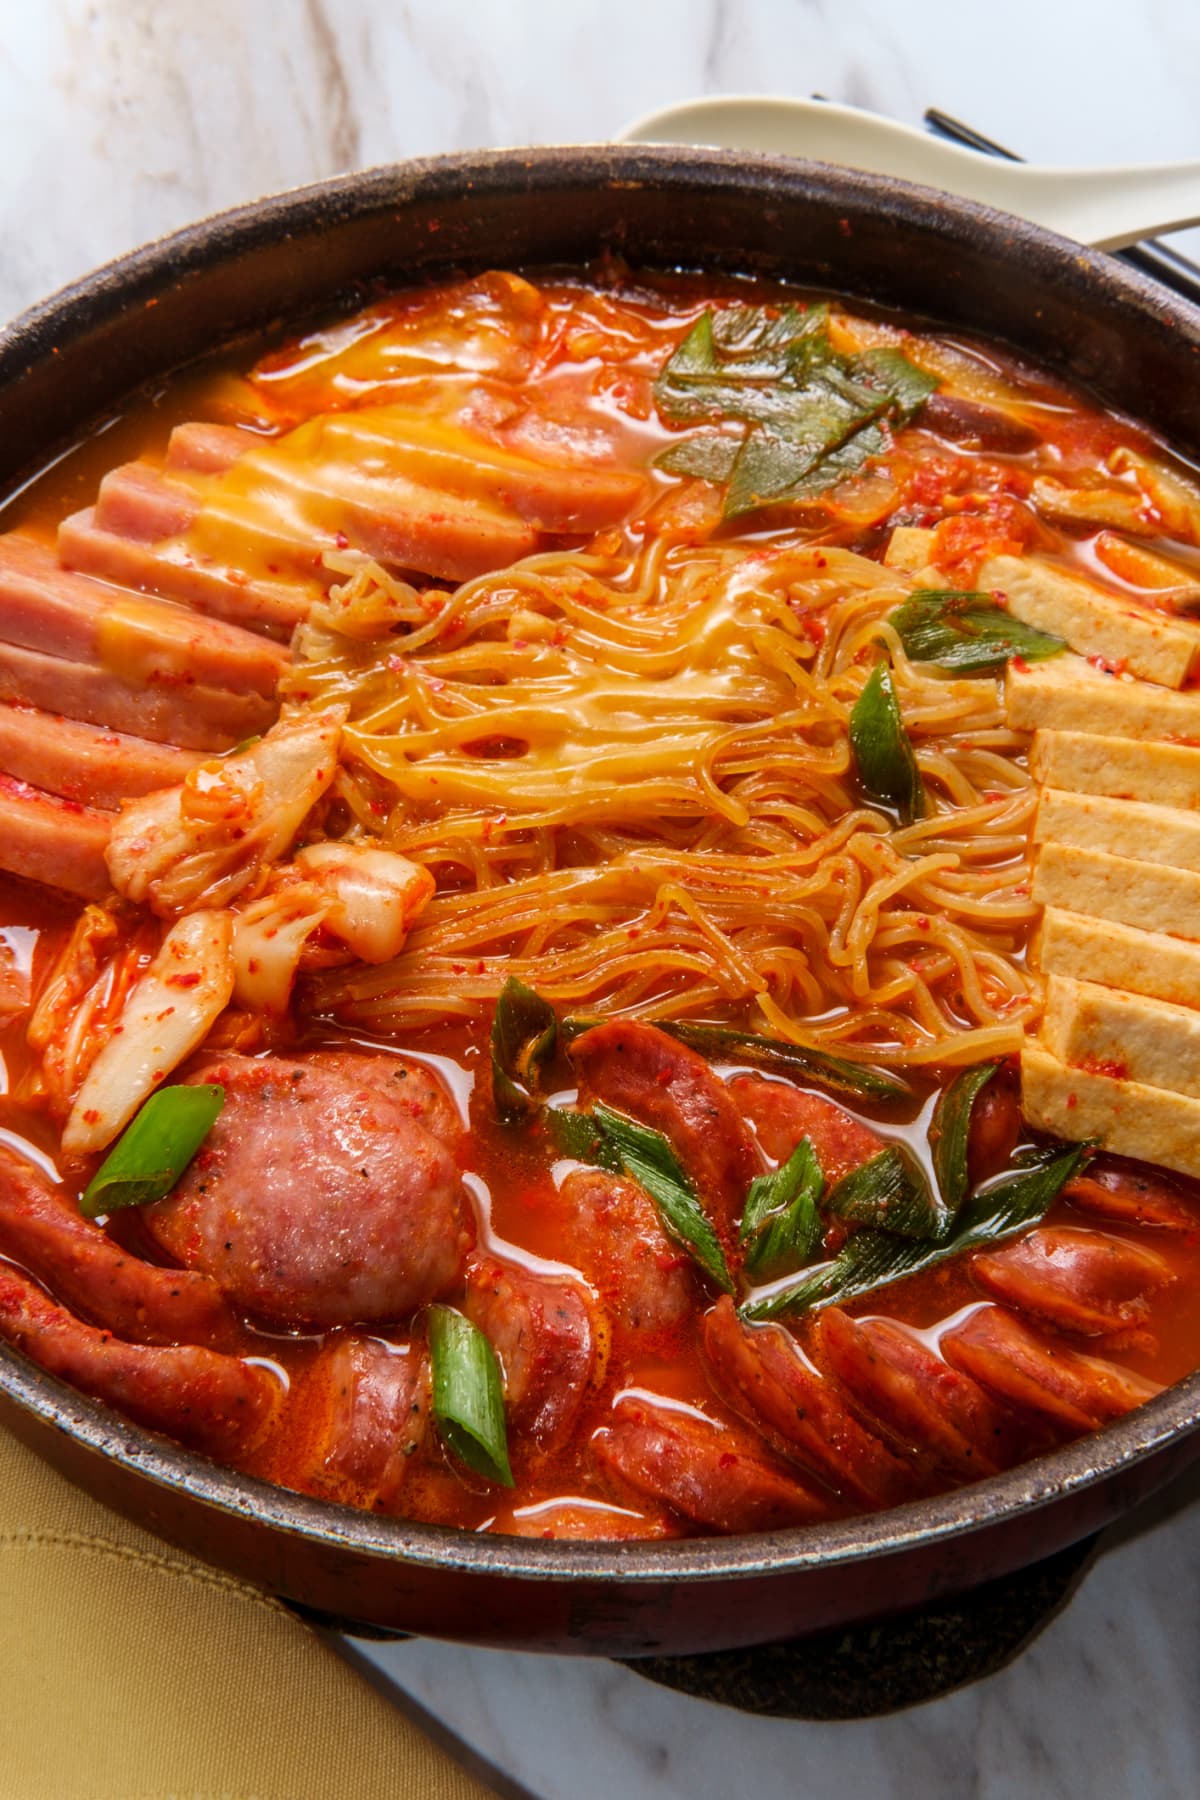 Korean comfort food army base stew also known as Budae-jjigae with sausage tofu and canned ham